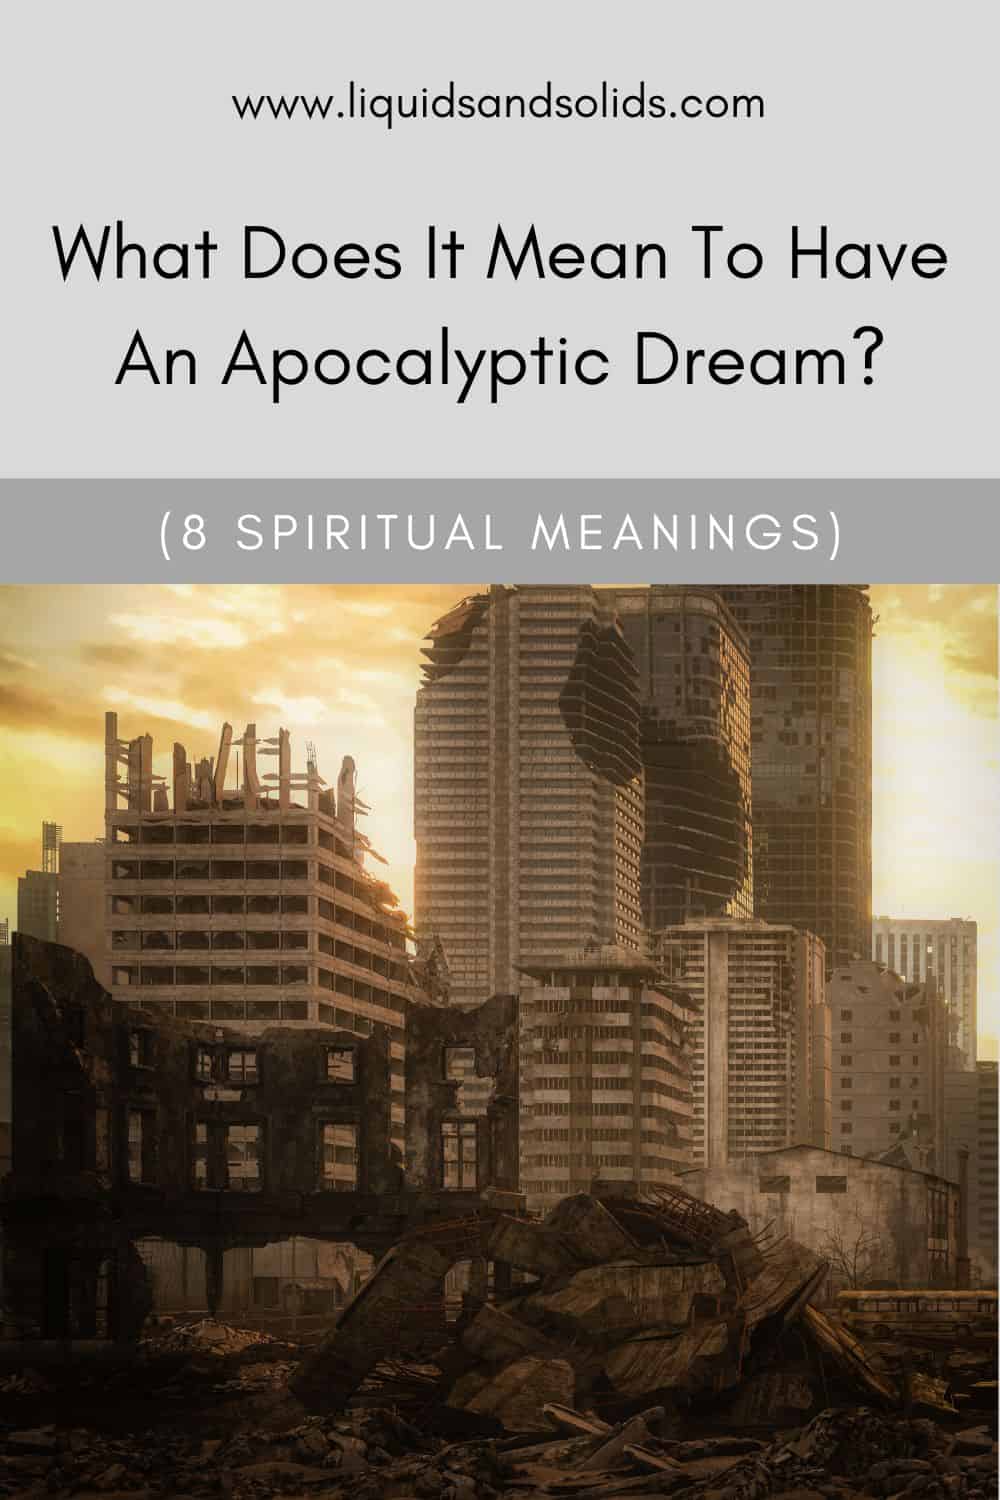 Apocalyptic dreams - symbolic meaning